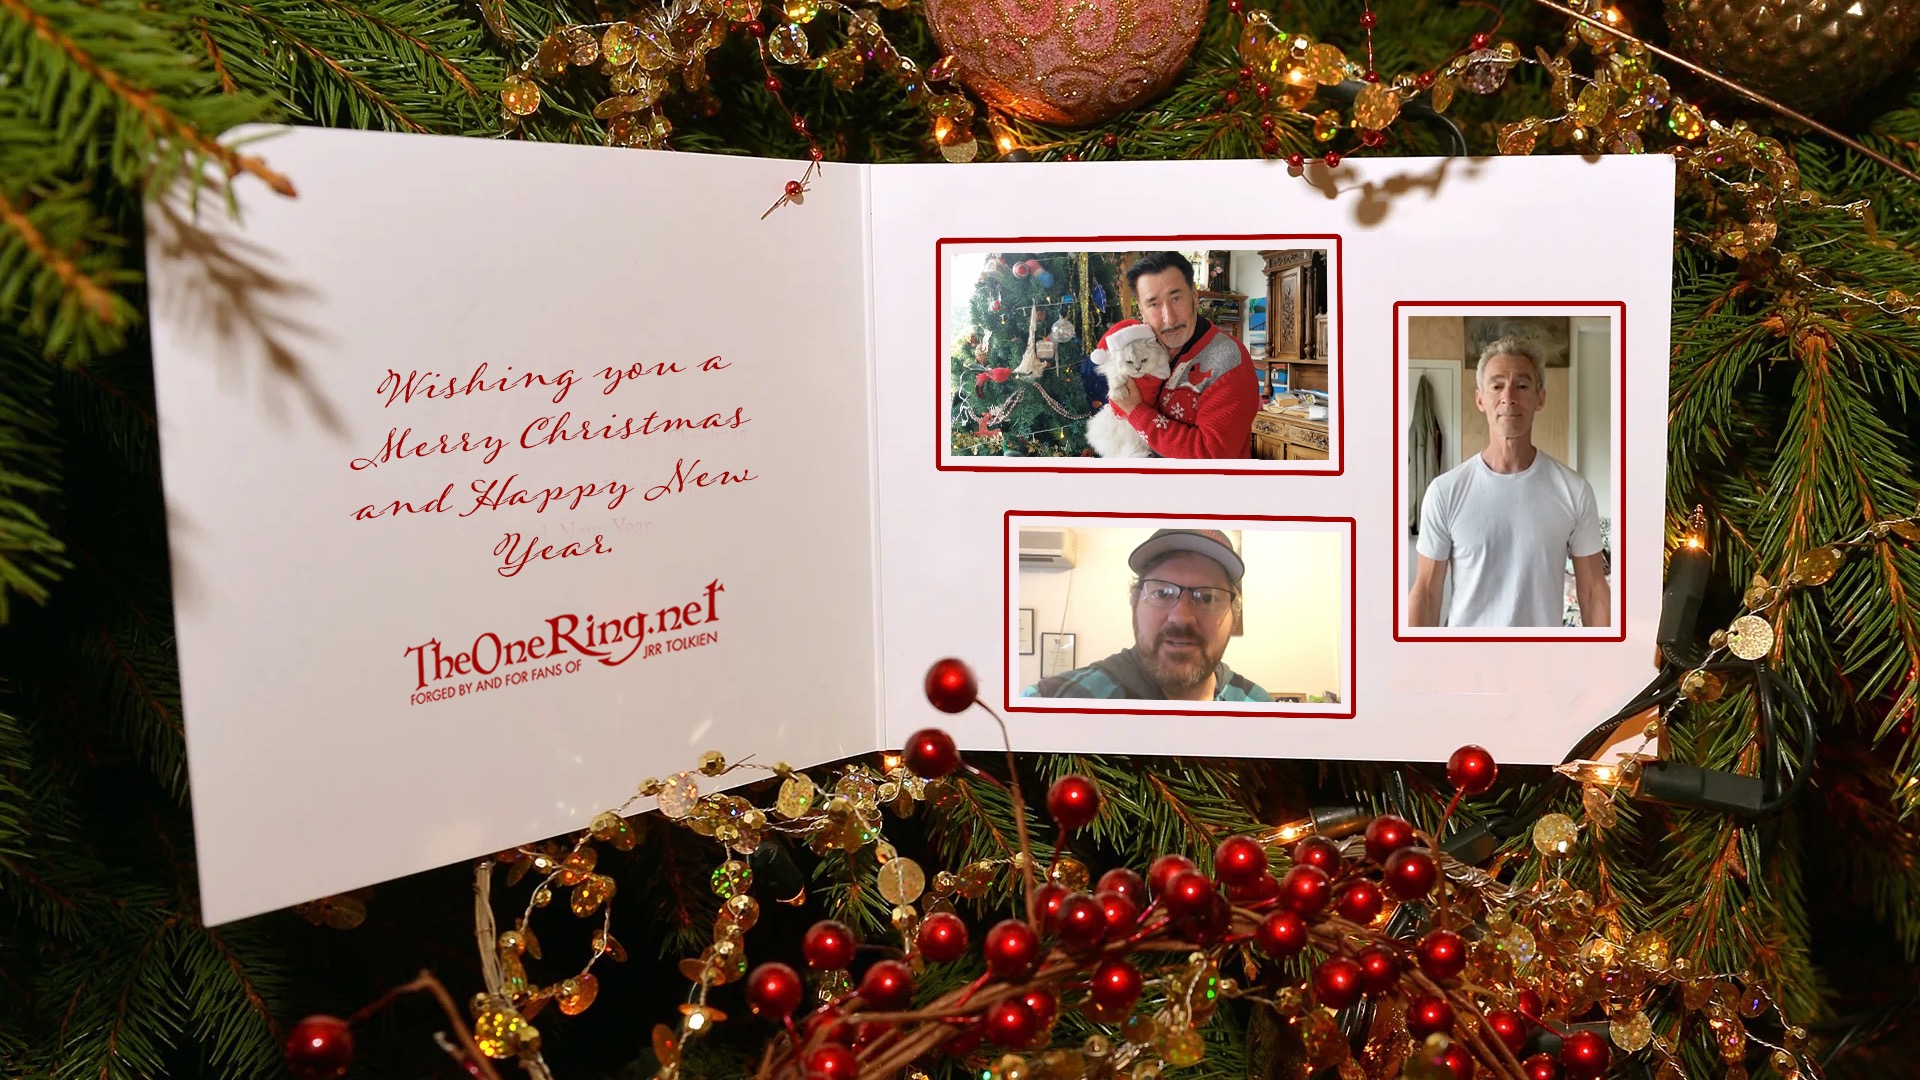 Christmas greetings! – from some familiar faces.